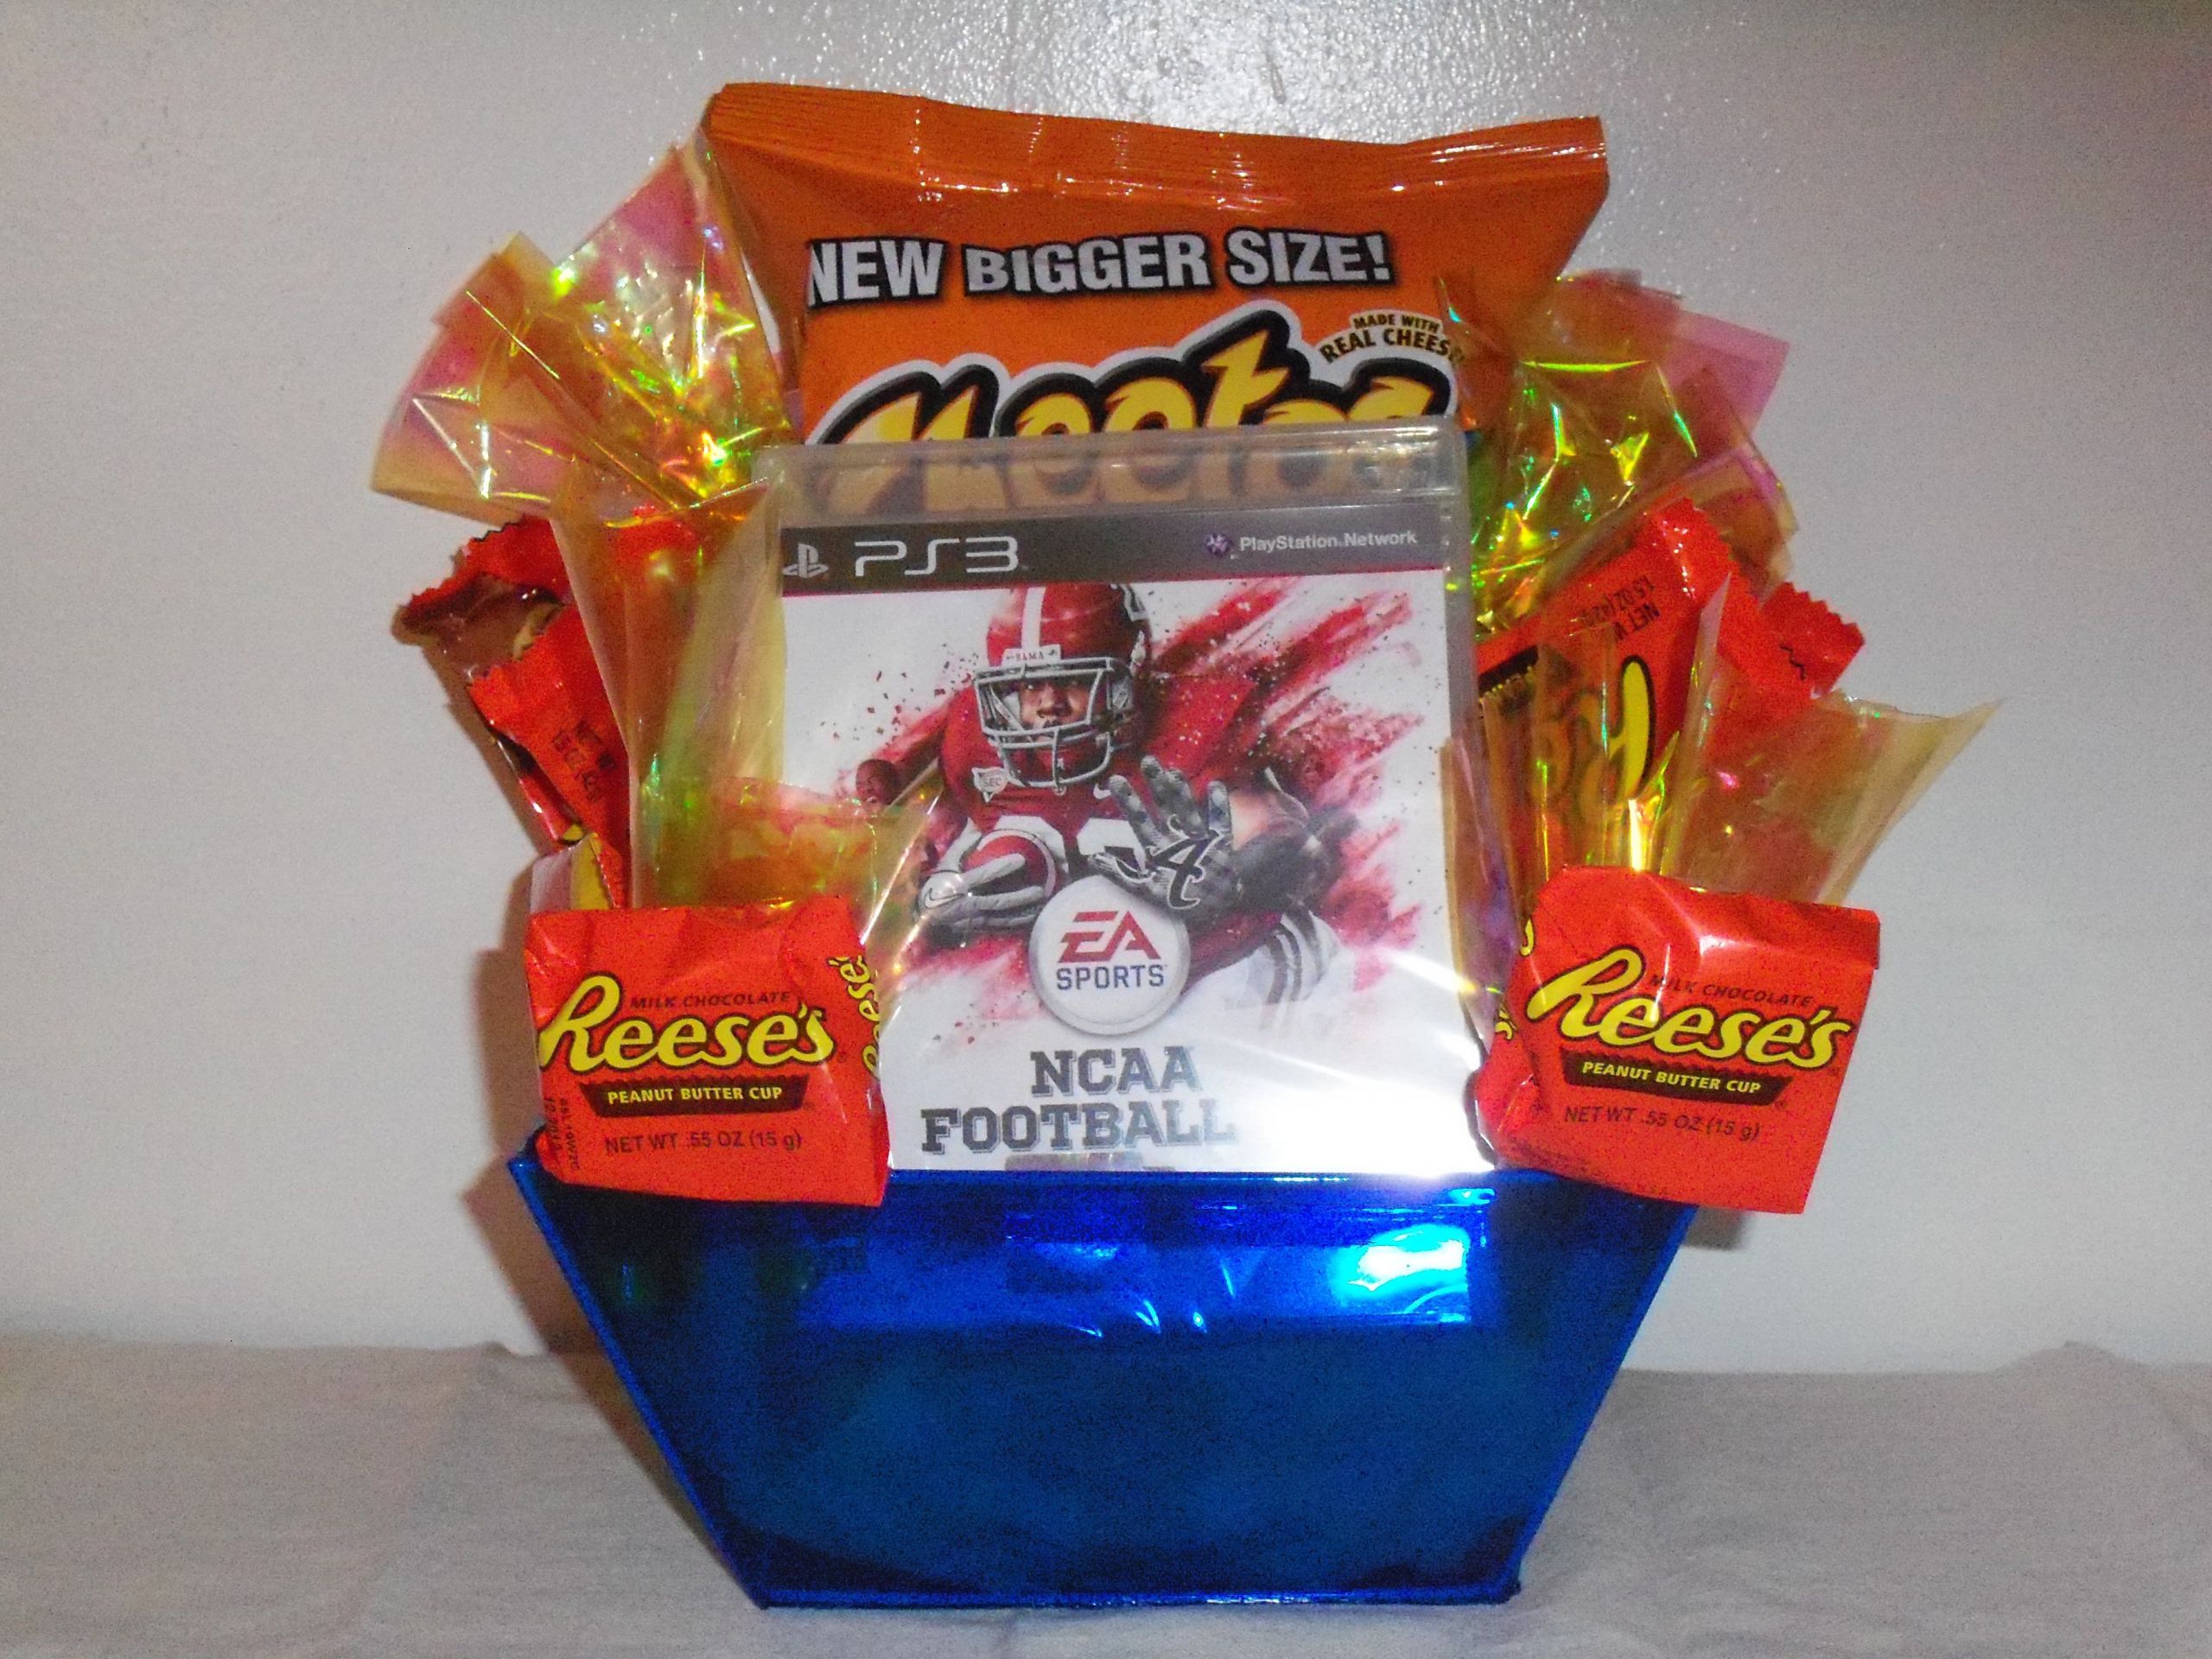 Game Gift Basket Ideas
 Video Game Basket Except with an Xbox game of course